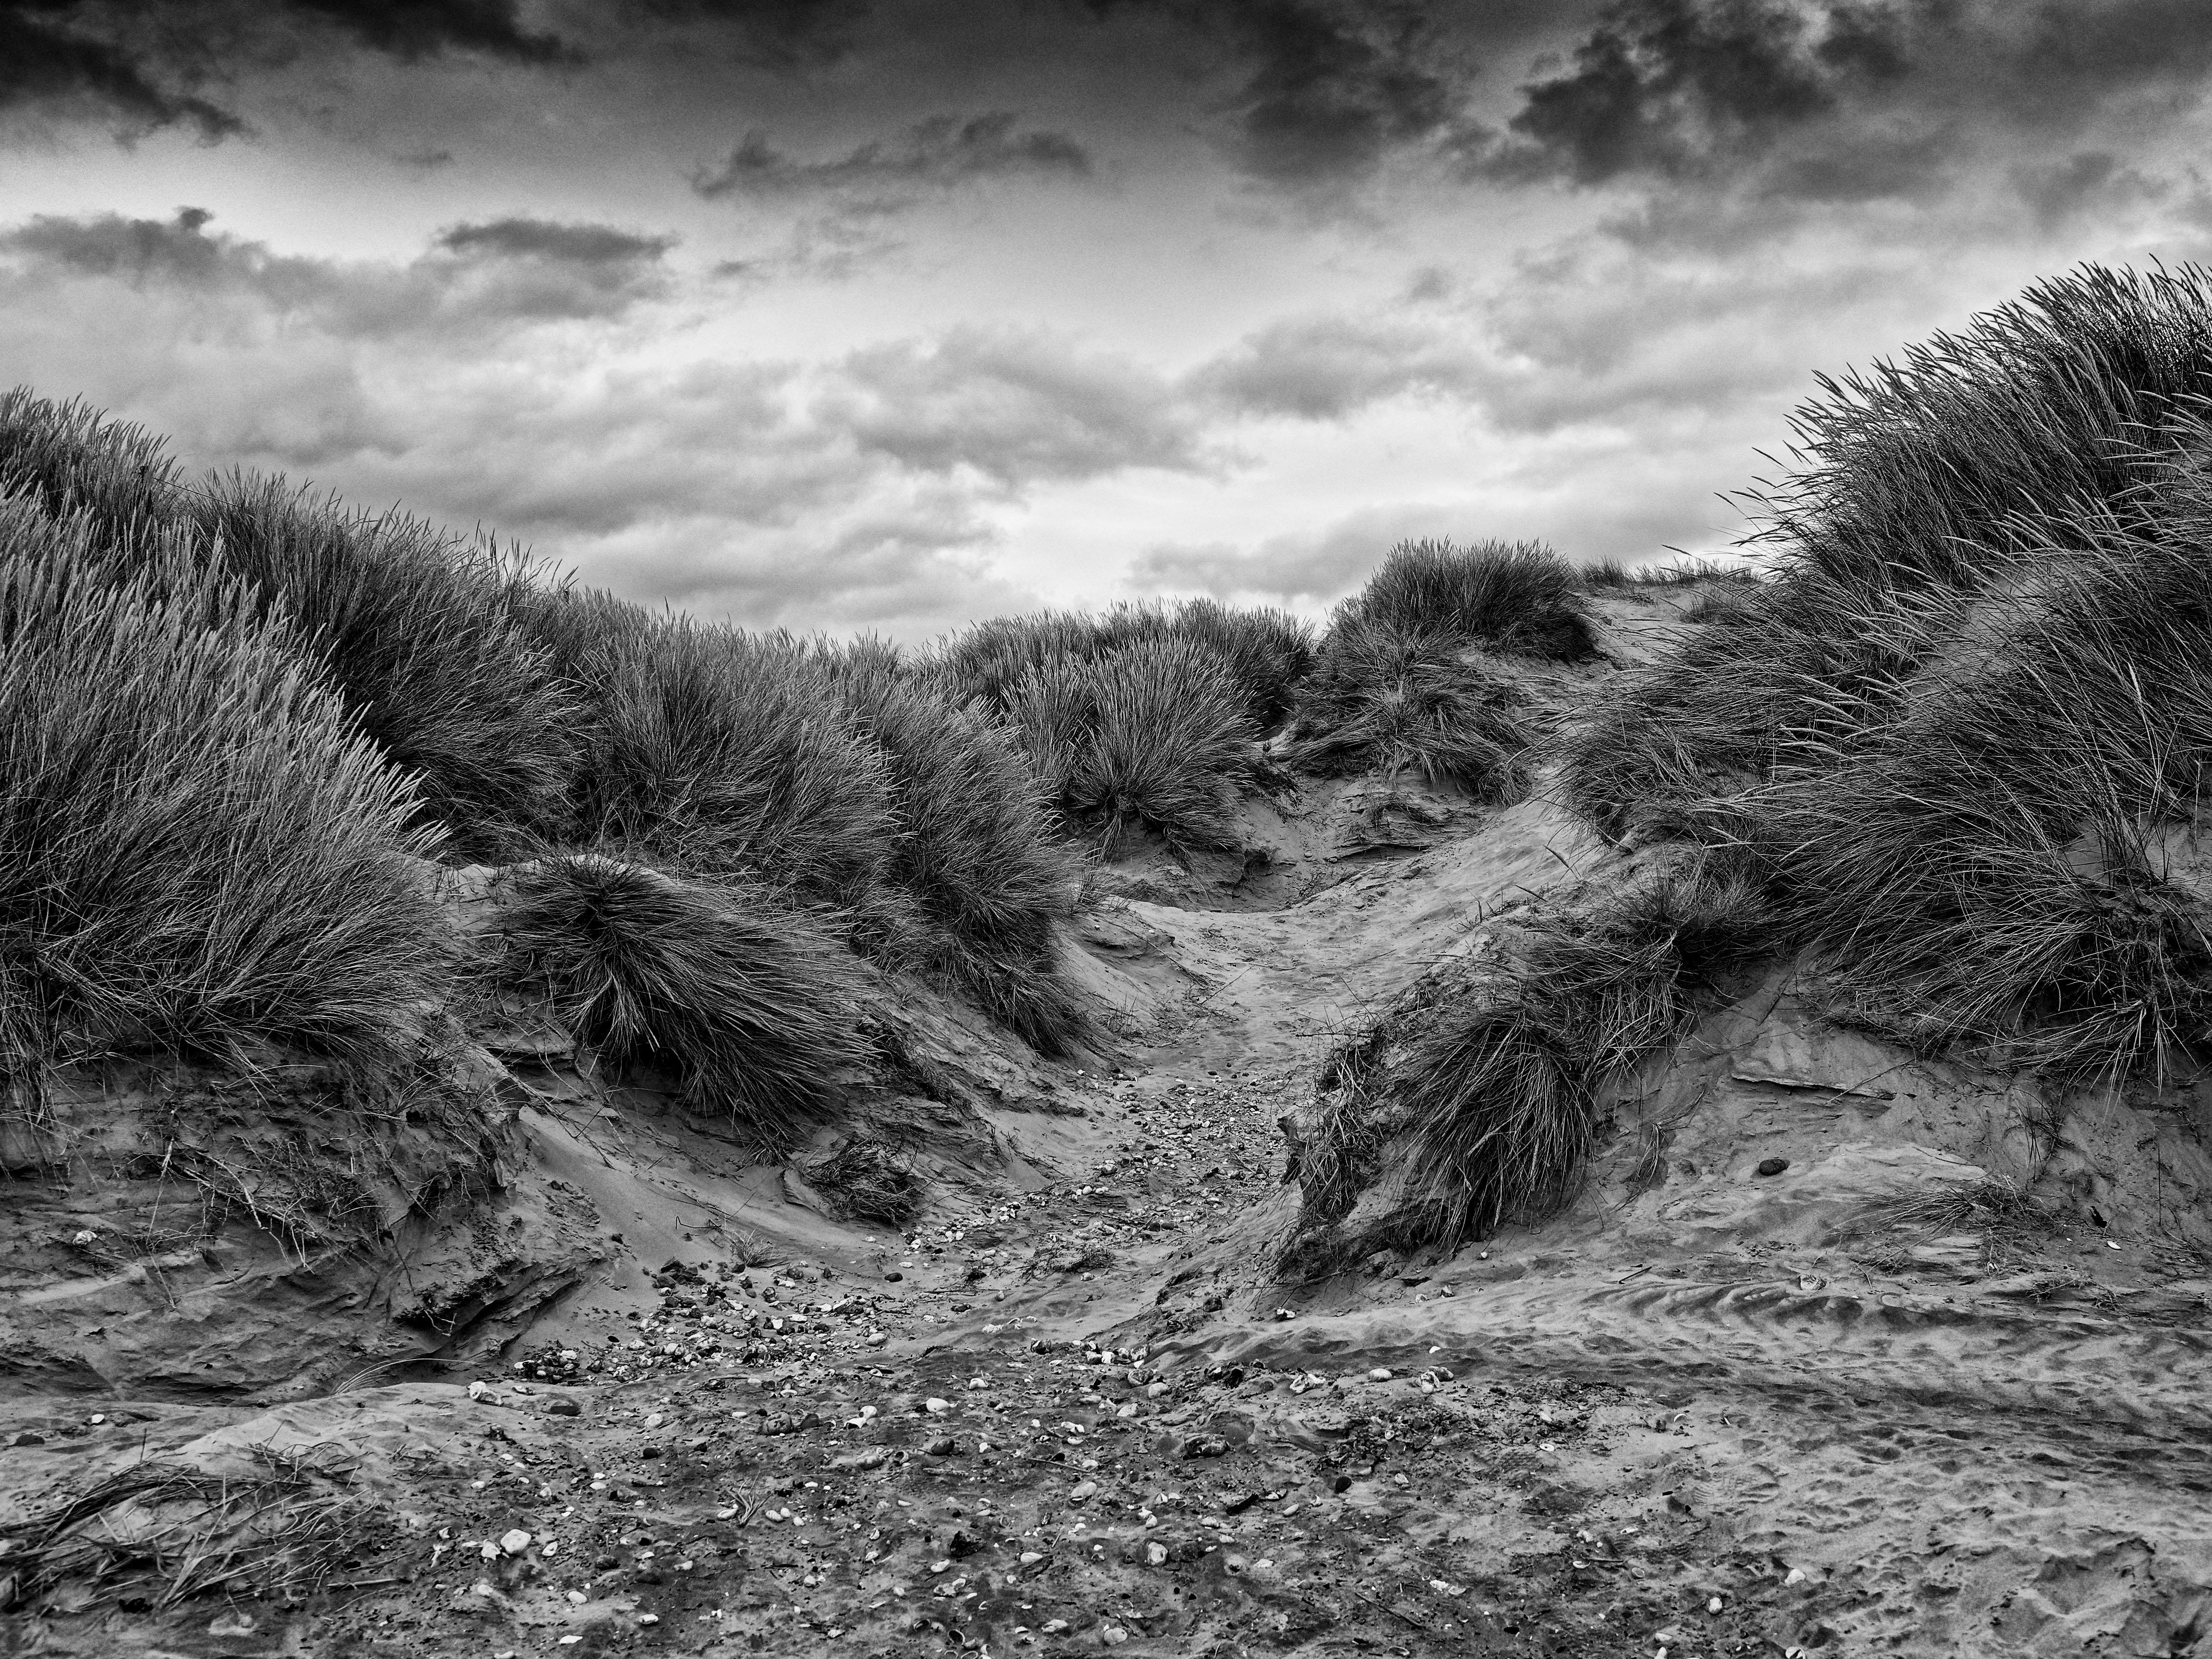 September – Black and white: The Dunes by Ray Foxlees